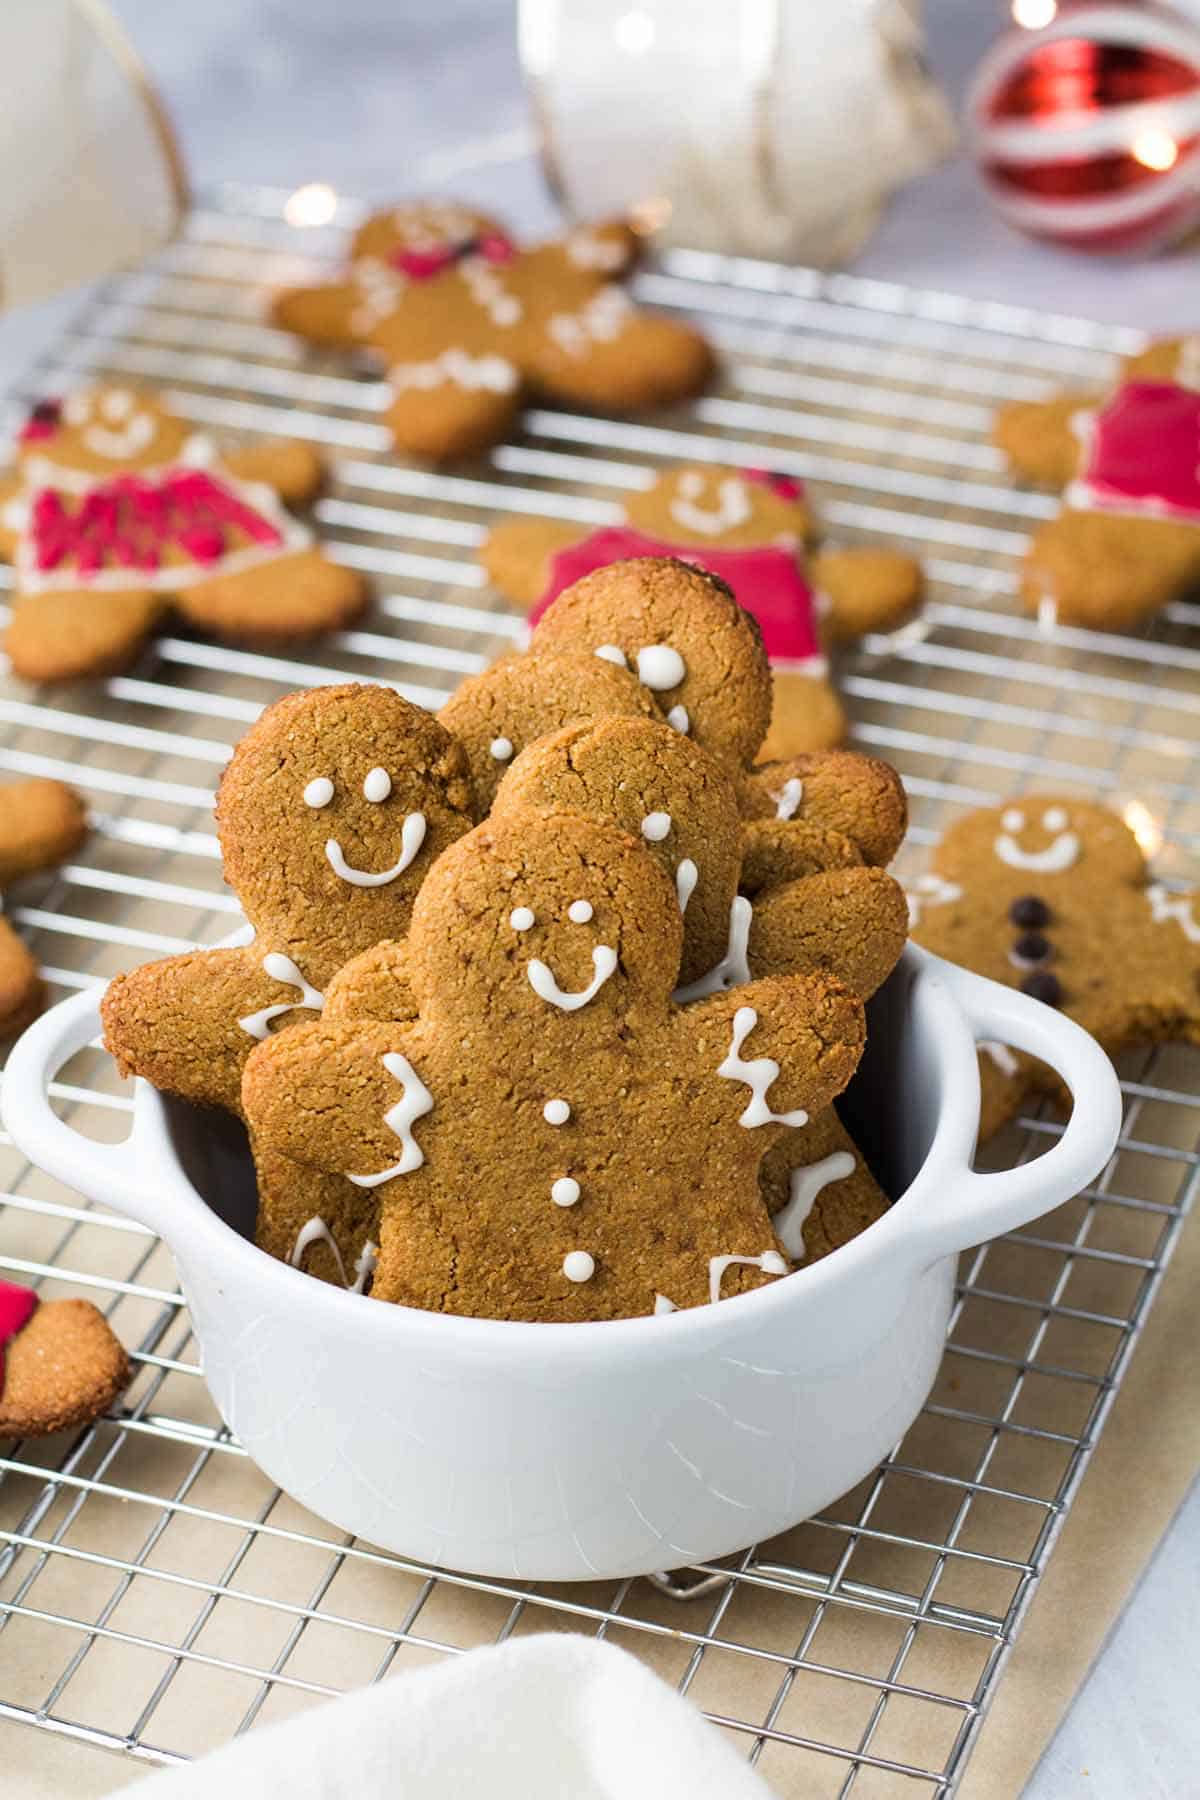 Several gingerbread cookies in a white bowl with more cookies on a baking tray in the background. 